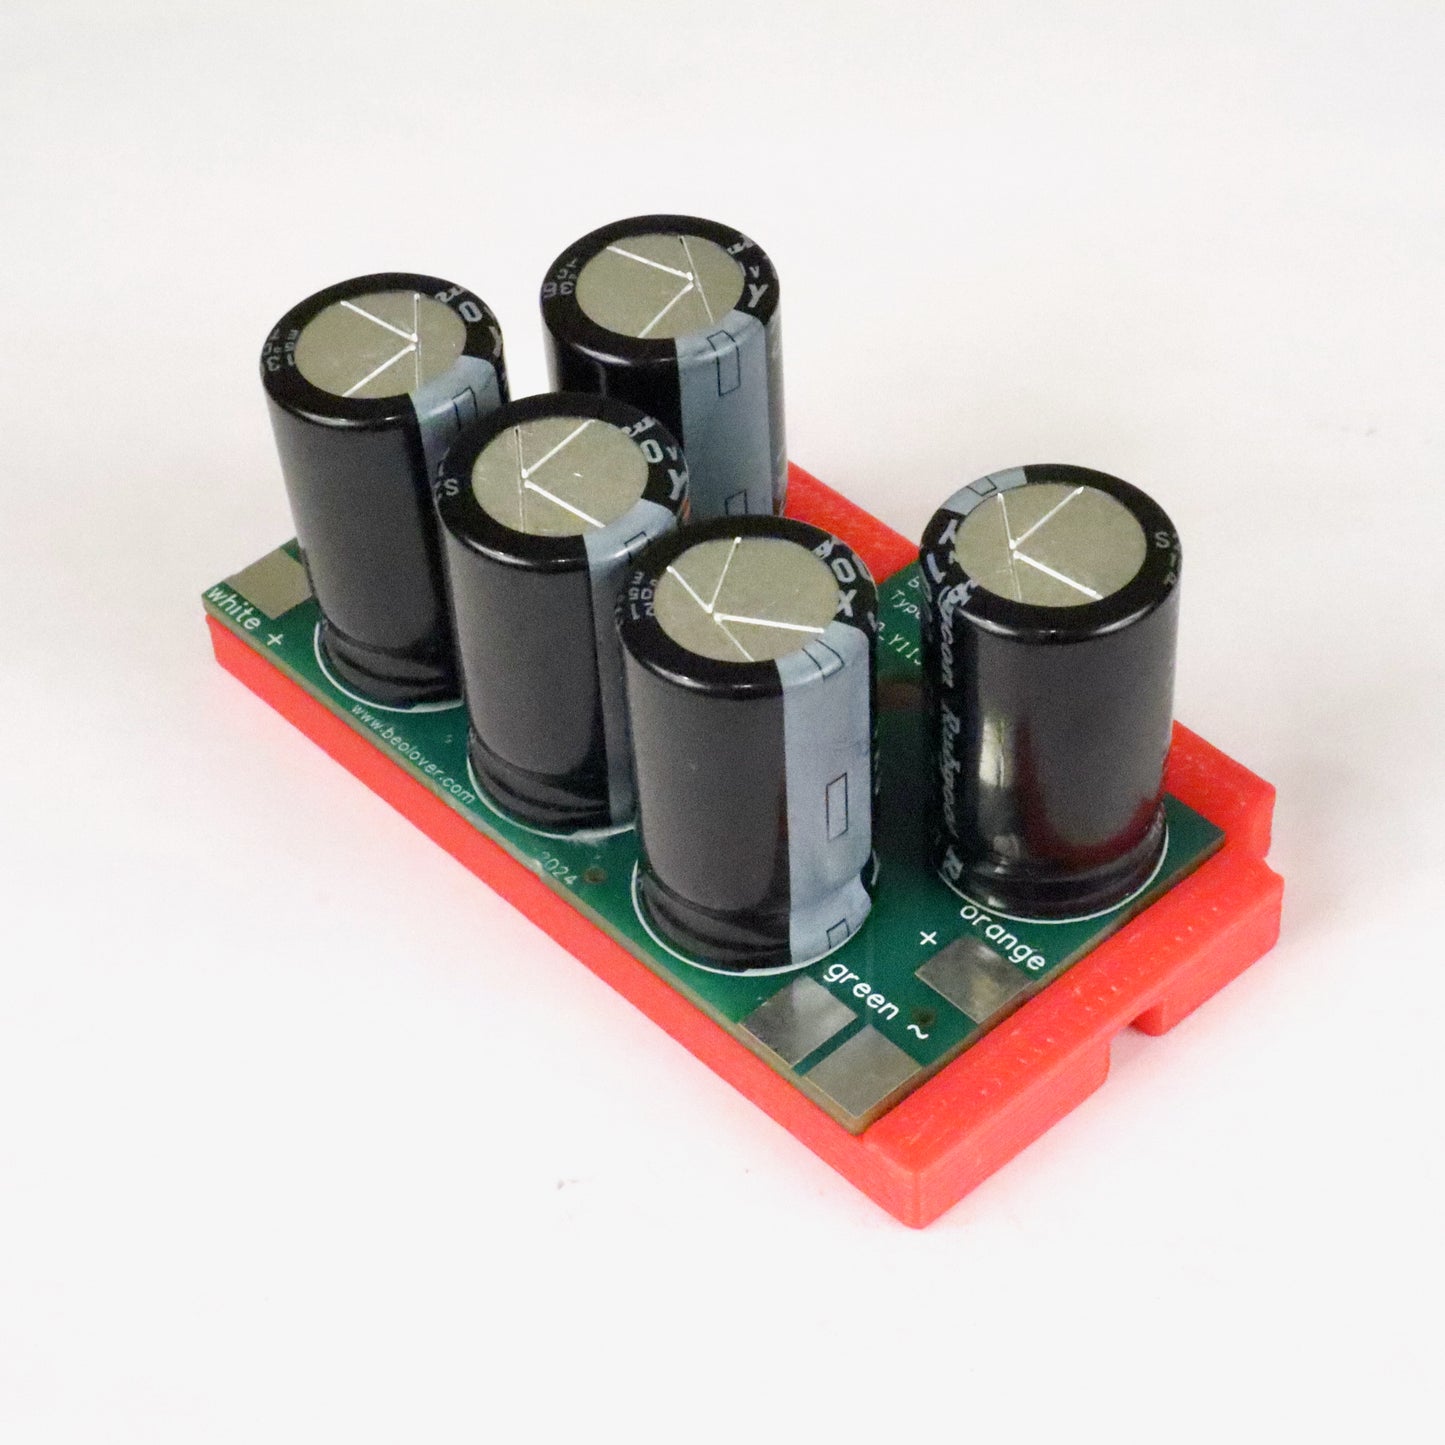 Main Reservoir Capacitor for Beogram 4002 and 4004 (Types 551x/552x)